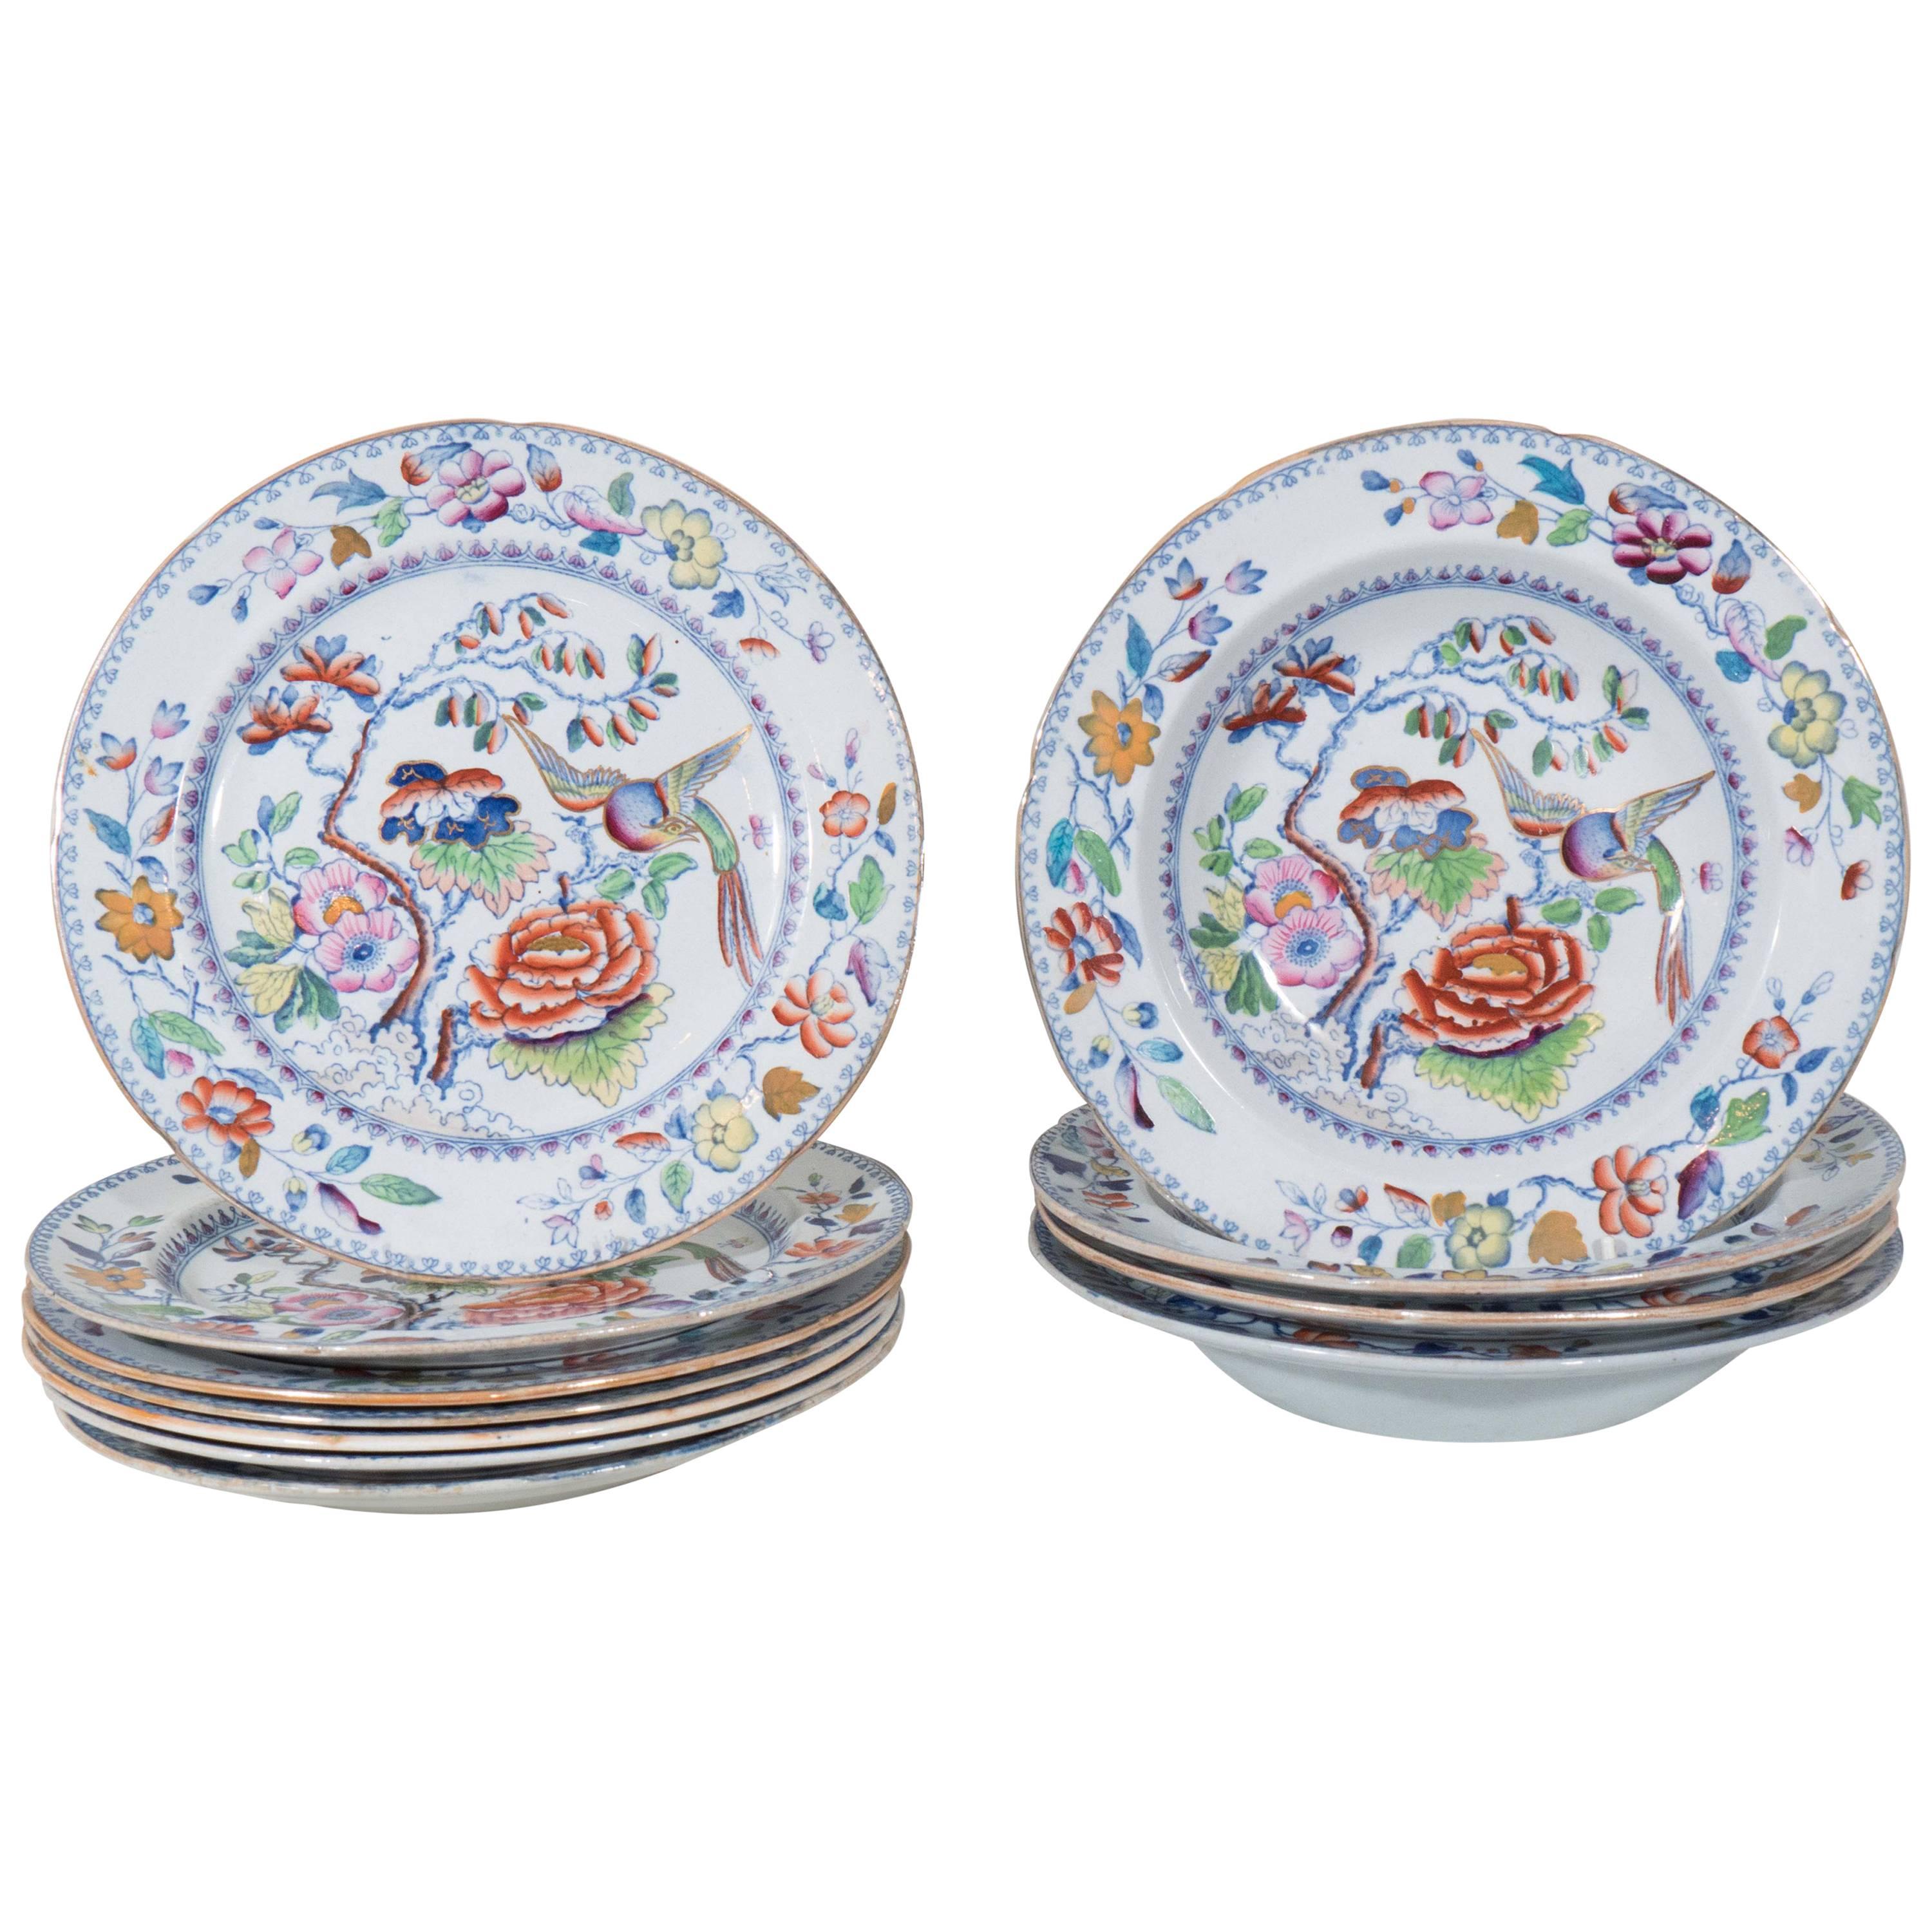 Set of Mason's Ironstone Dinner and Soup Dishes in "Flying Bird" Pattern